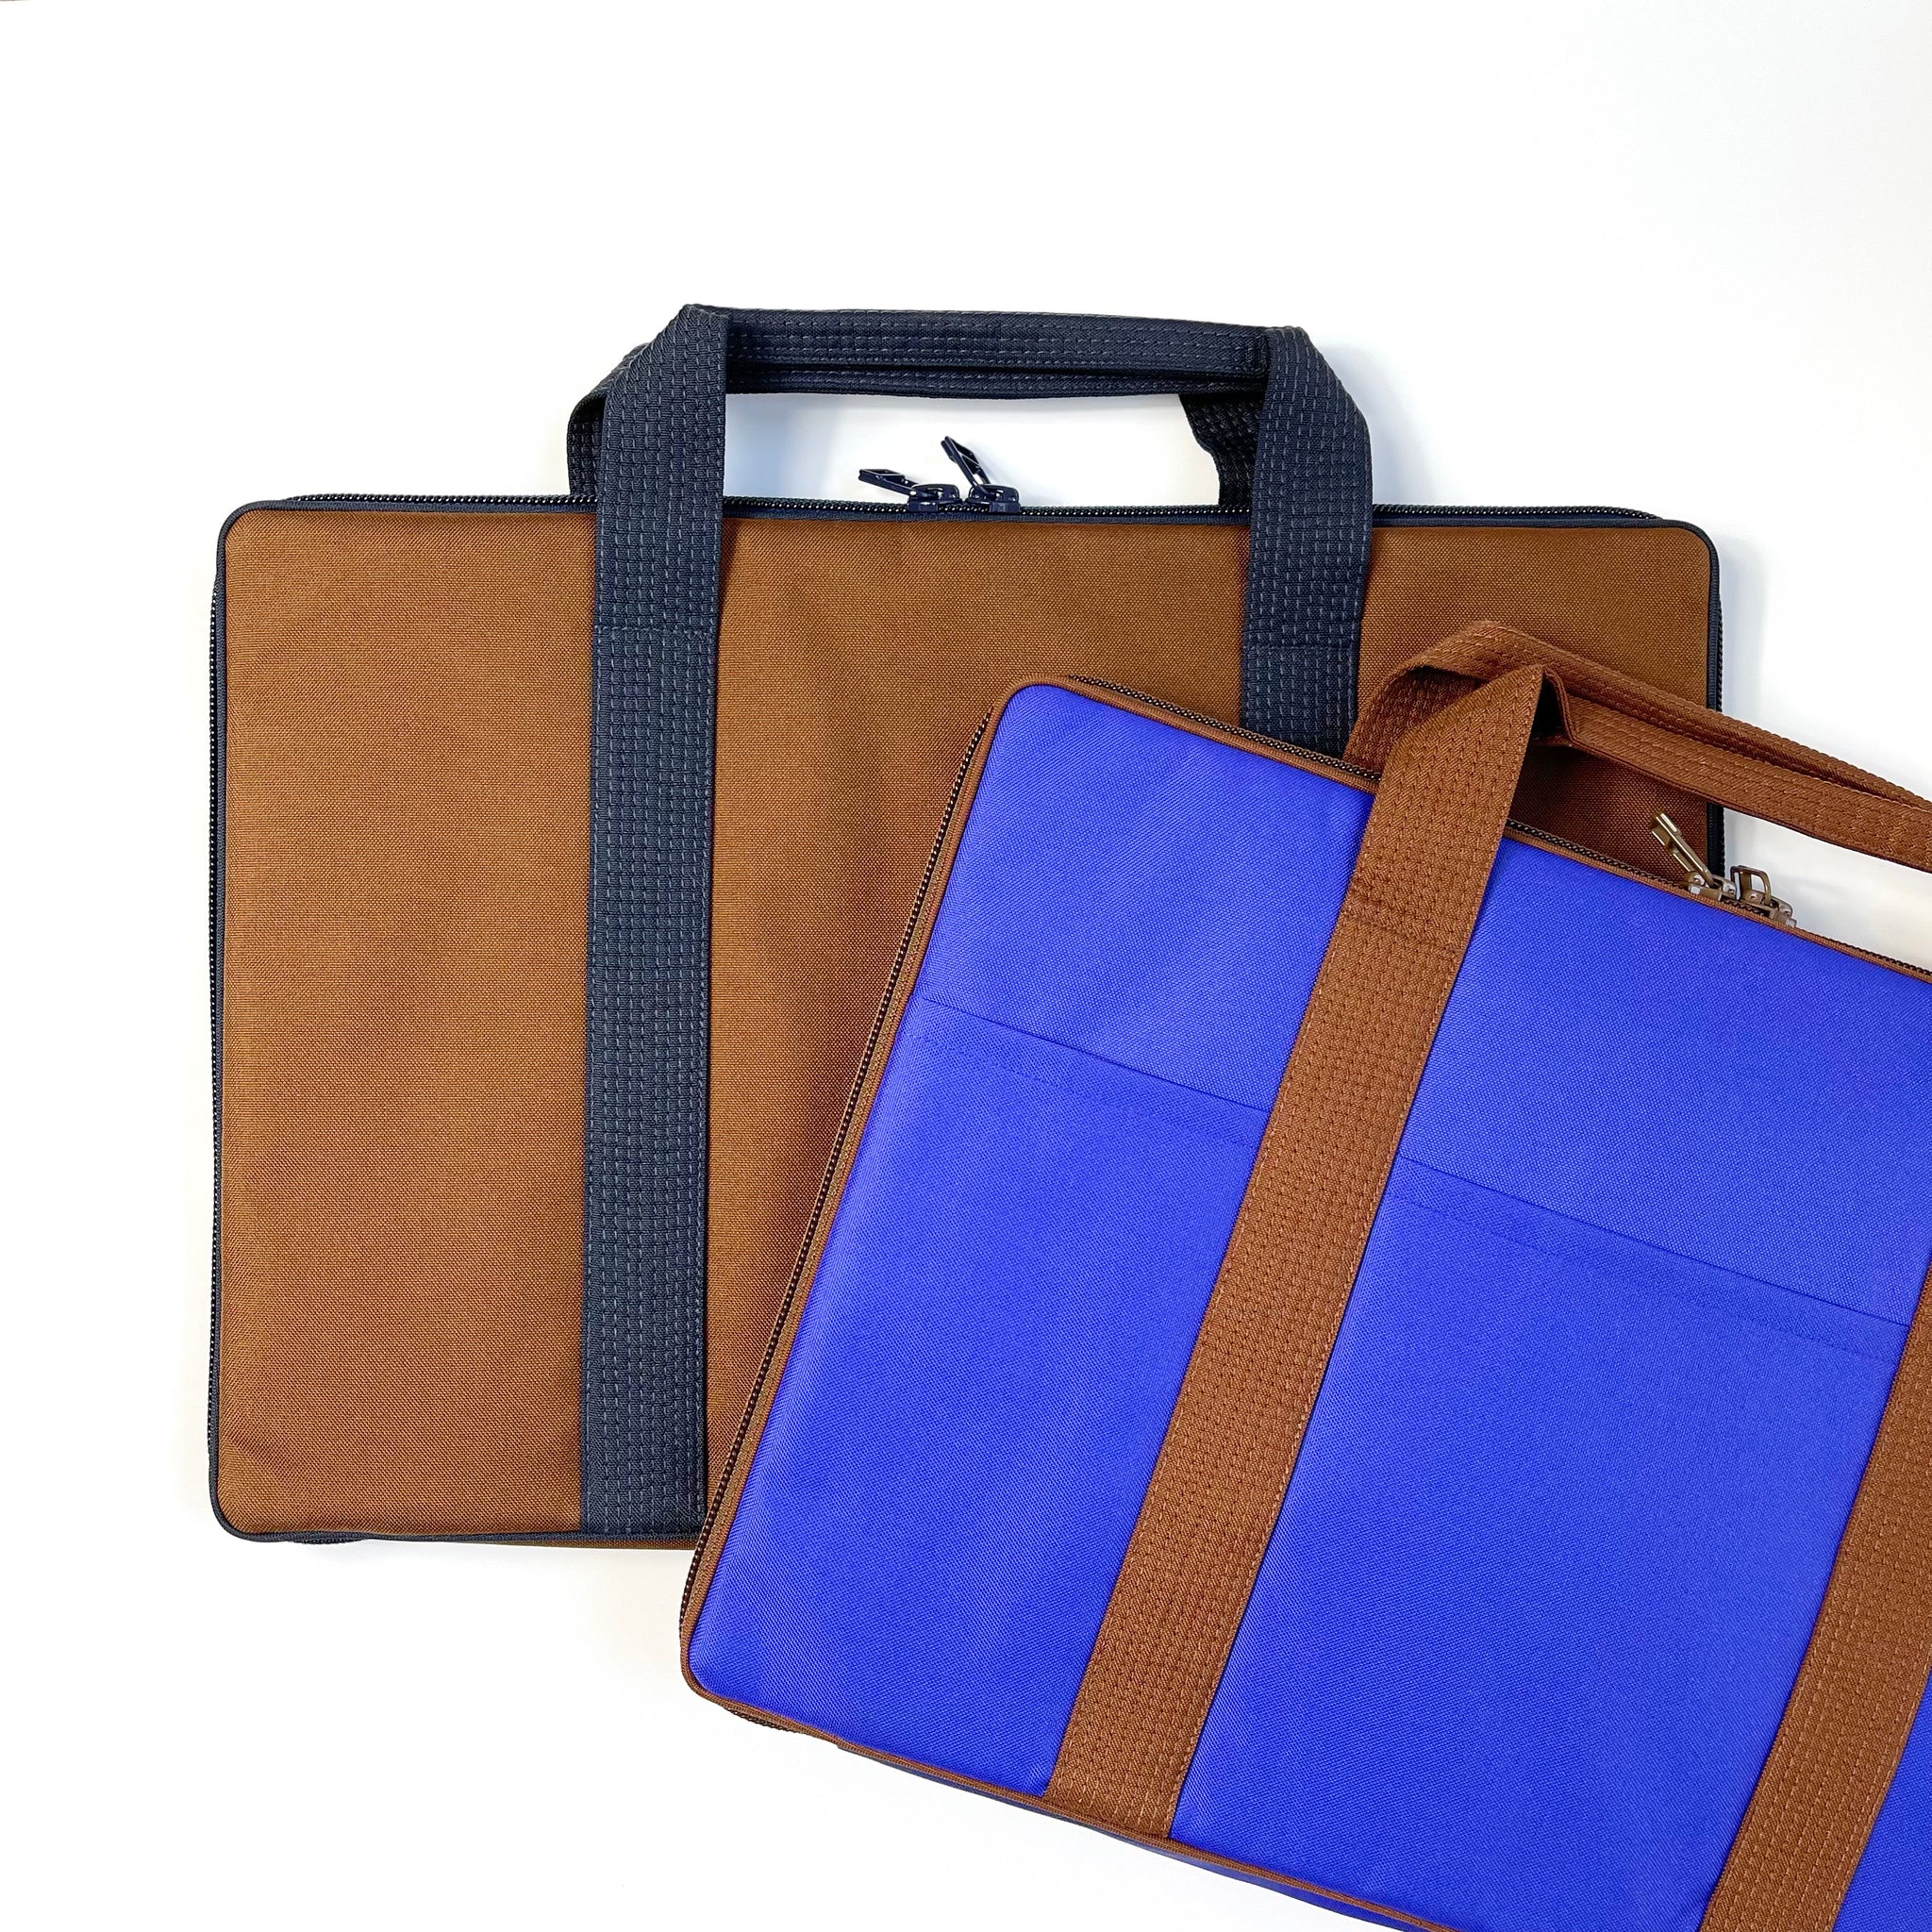 two recycled laptop briefcases in brown and indigo blue